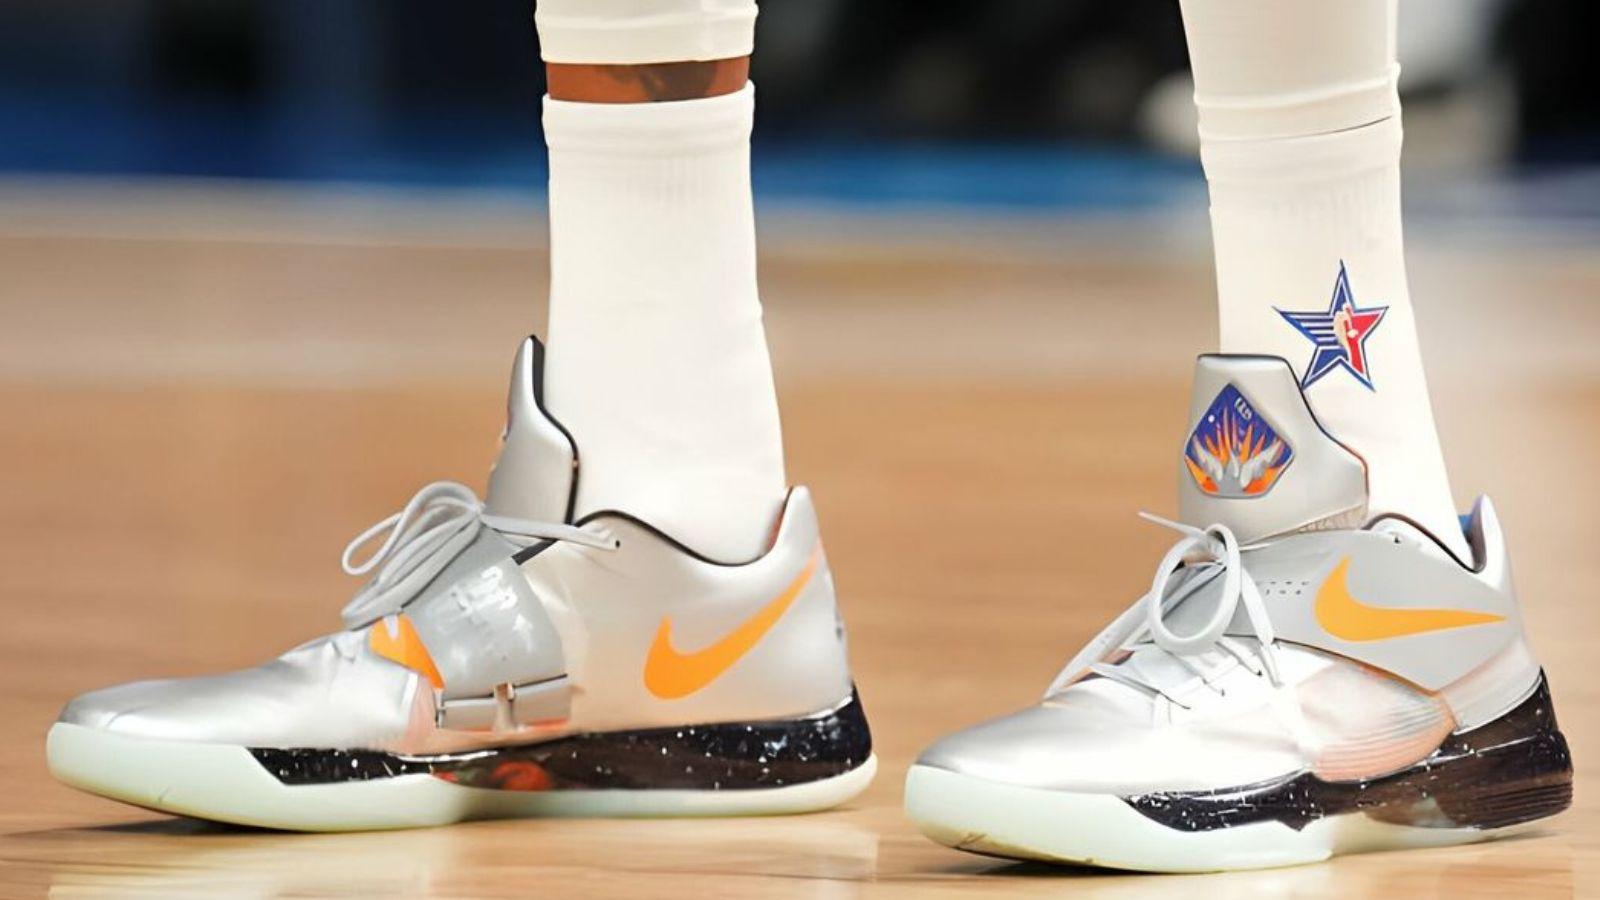 Kevin Durant's KD 4 sneaker.